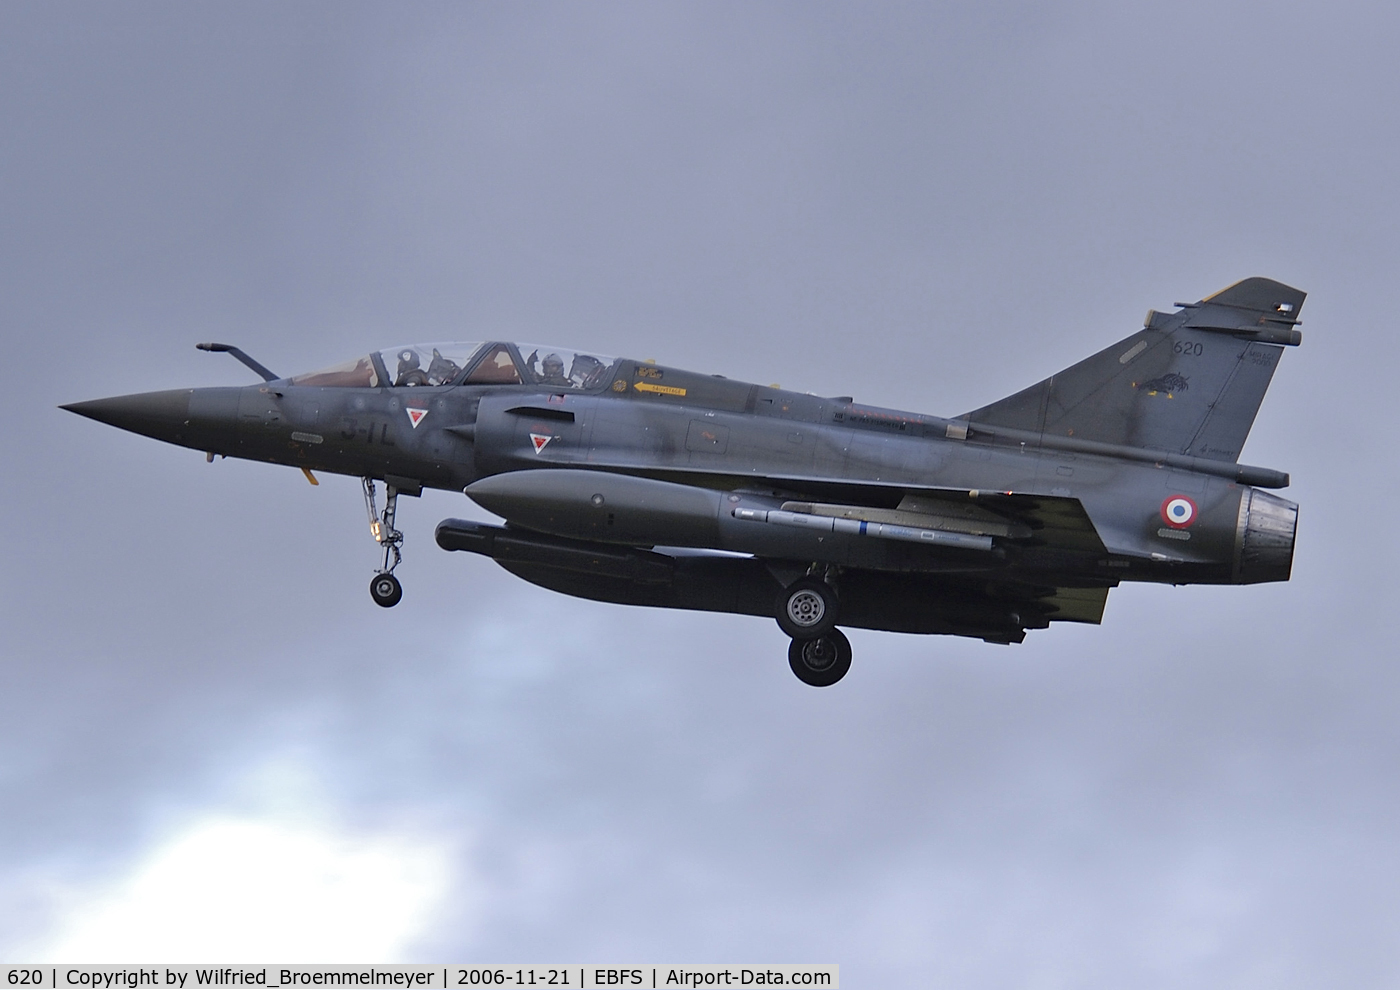 620, Dassault Mirage 2000D C/N Not found 620, Military Code 3-IL - Approach to Runway 26R.